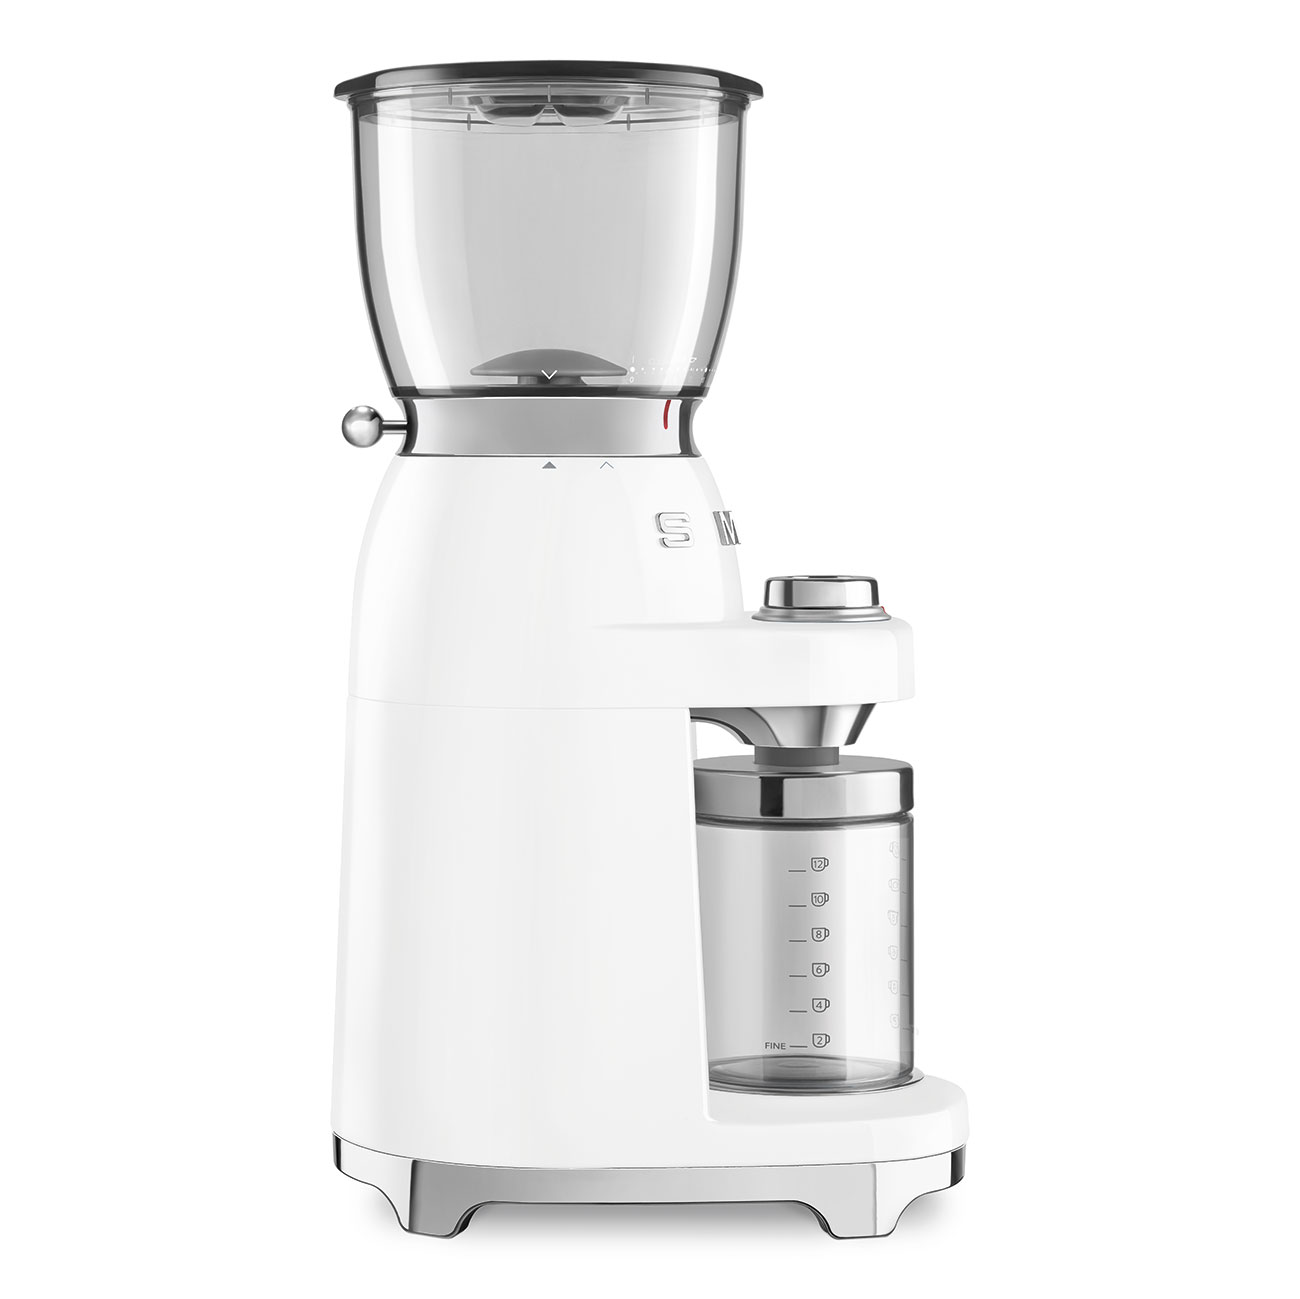 White Coffee Grinder featuring a conical burr - CGF01WHUK - Smeg_3